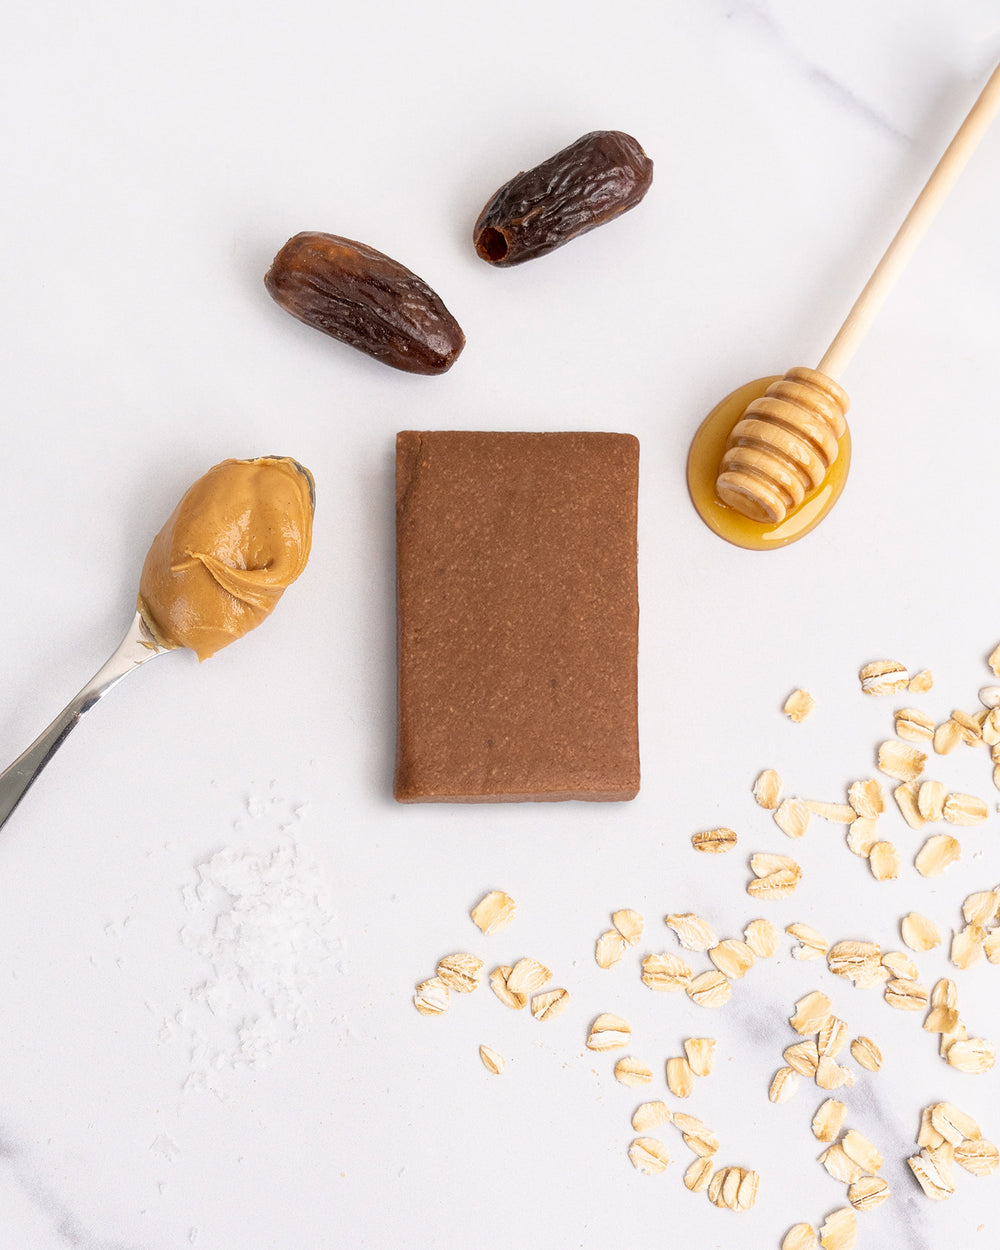 Peanut Butter Honey Kize Protein Bar Unwrapped Next to Ingredients